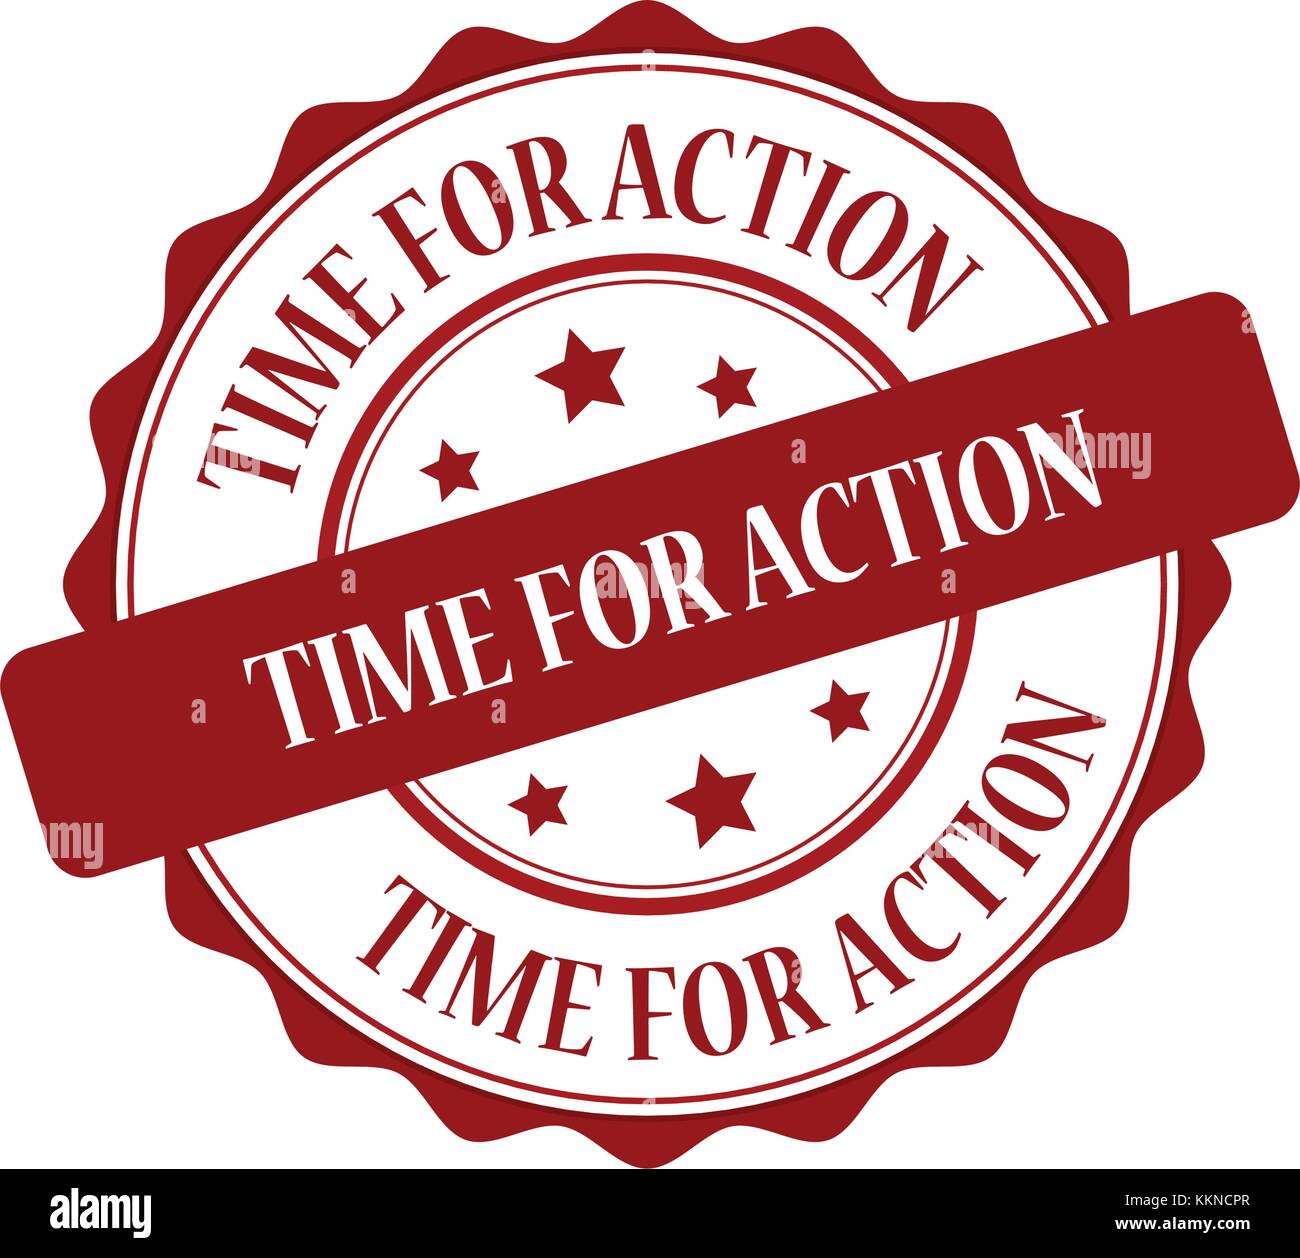 Time for action stamp illustration Stock Vector